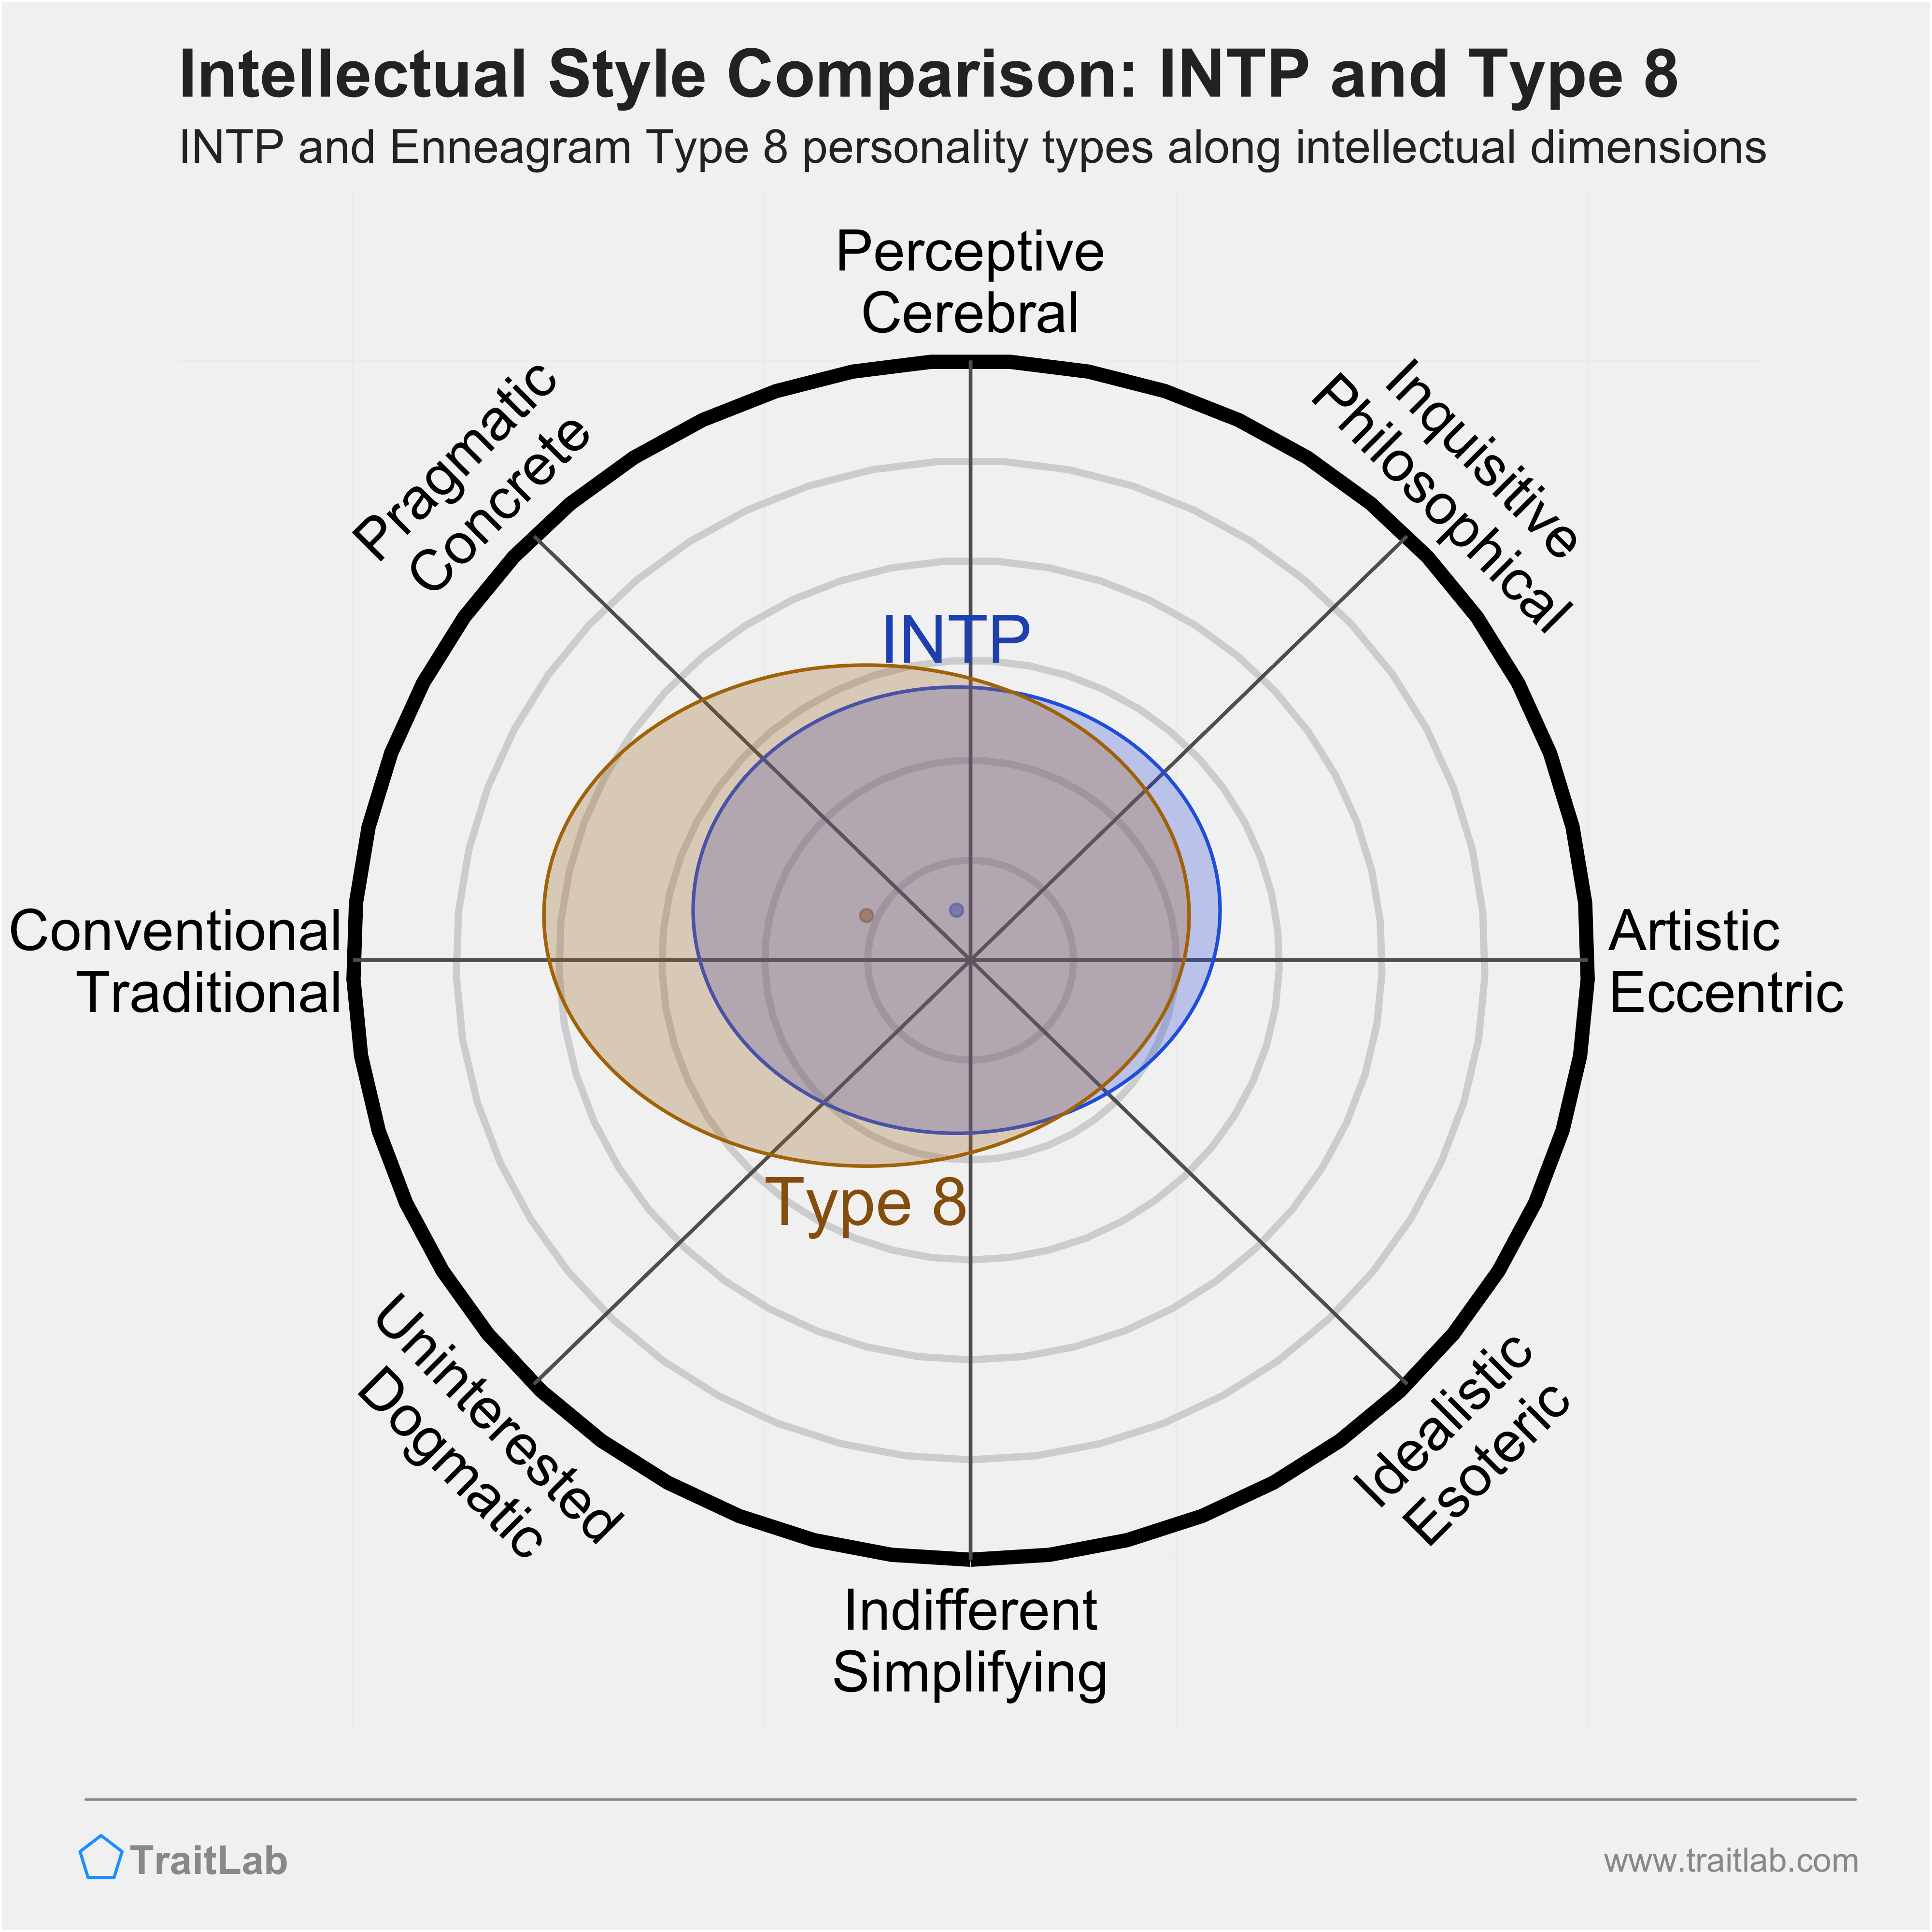 INTP and Type 8 comparison across intellectual dimensions